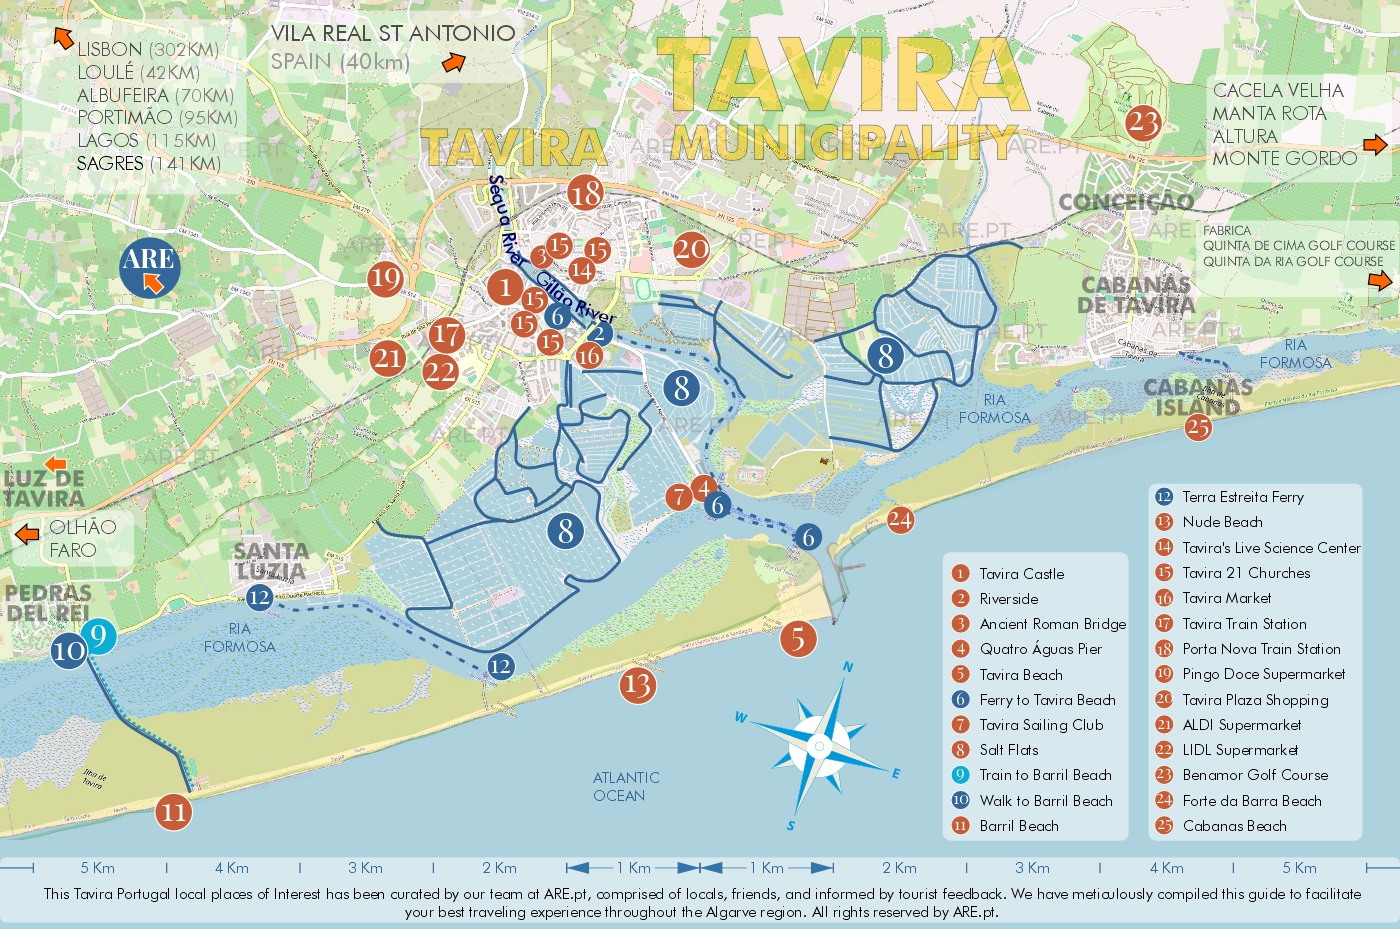 Map of Tavira and surroundings, with main points of interest, useful locations and residential areas. Distances to the main locations in the south of Portugal